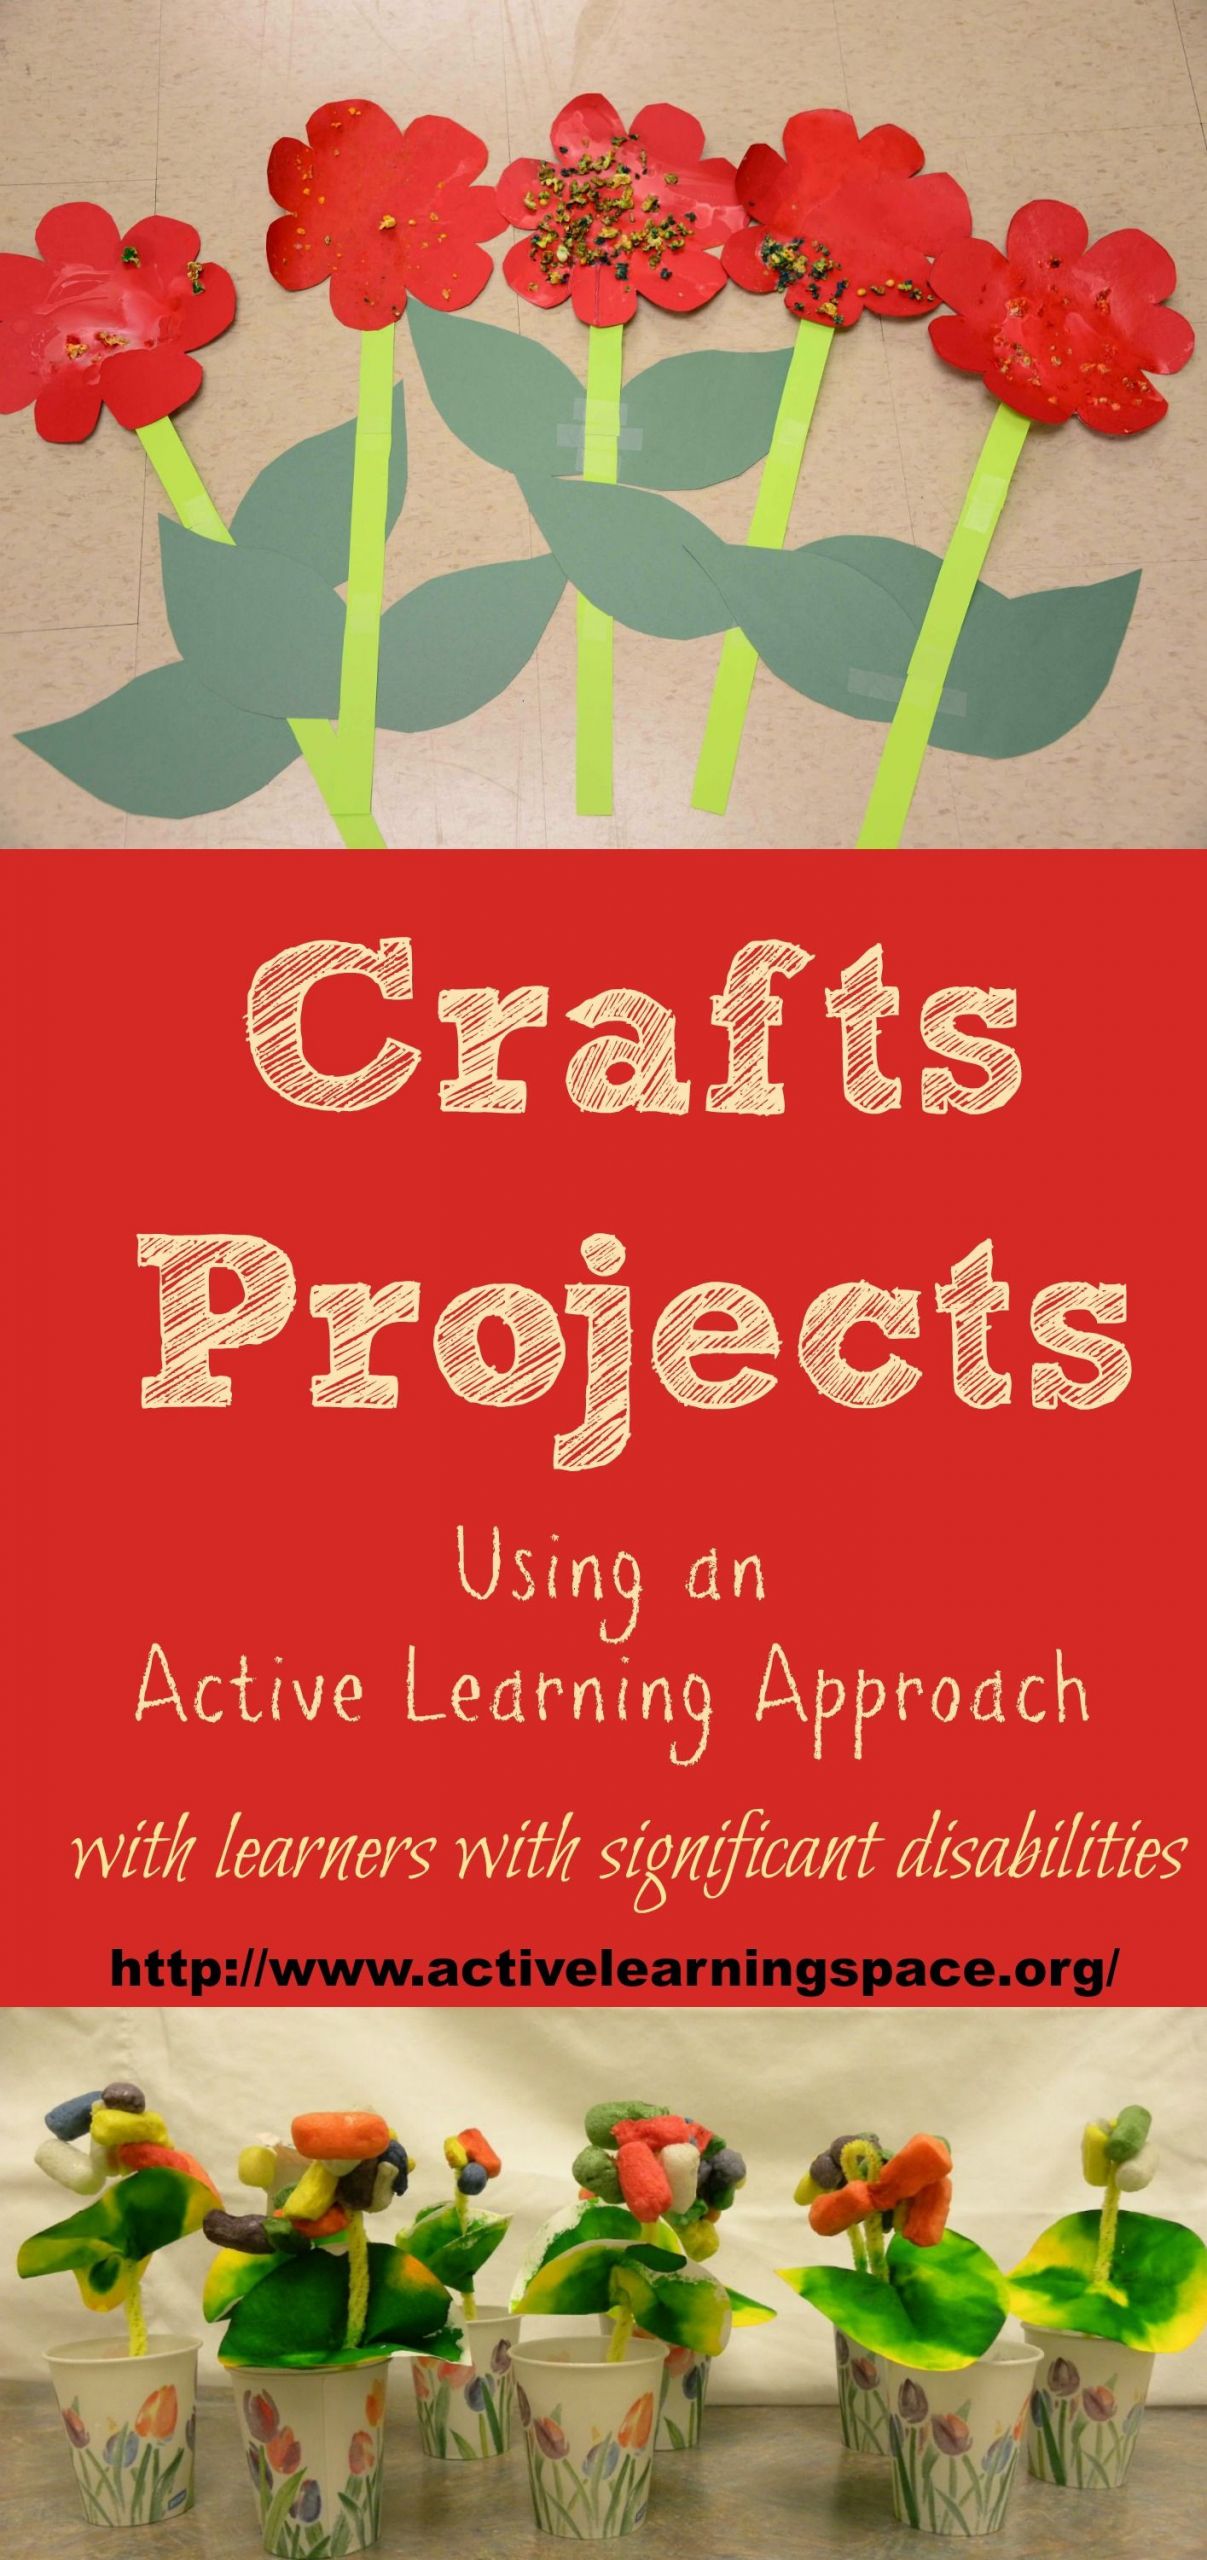 Group Craft Ideas For Adults
 Crafts Activities and Projects Using Active Learning